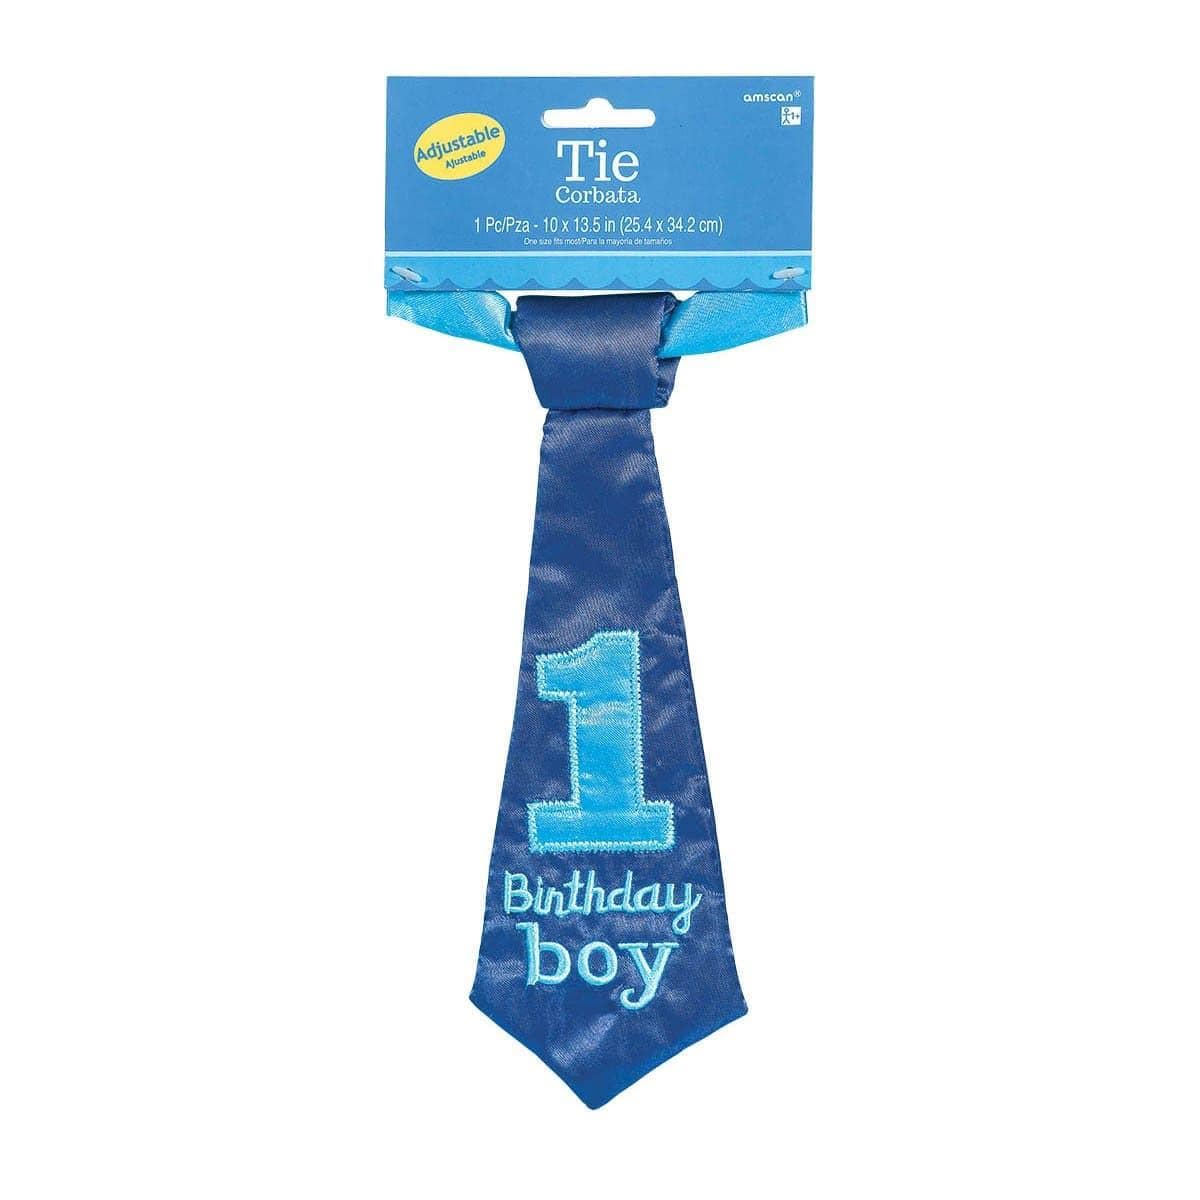 Buy 1st Birthday Boy Mix & Match - Tie 9 in. sold at Party Expert